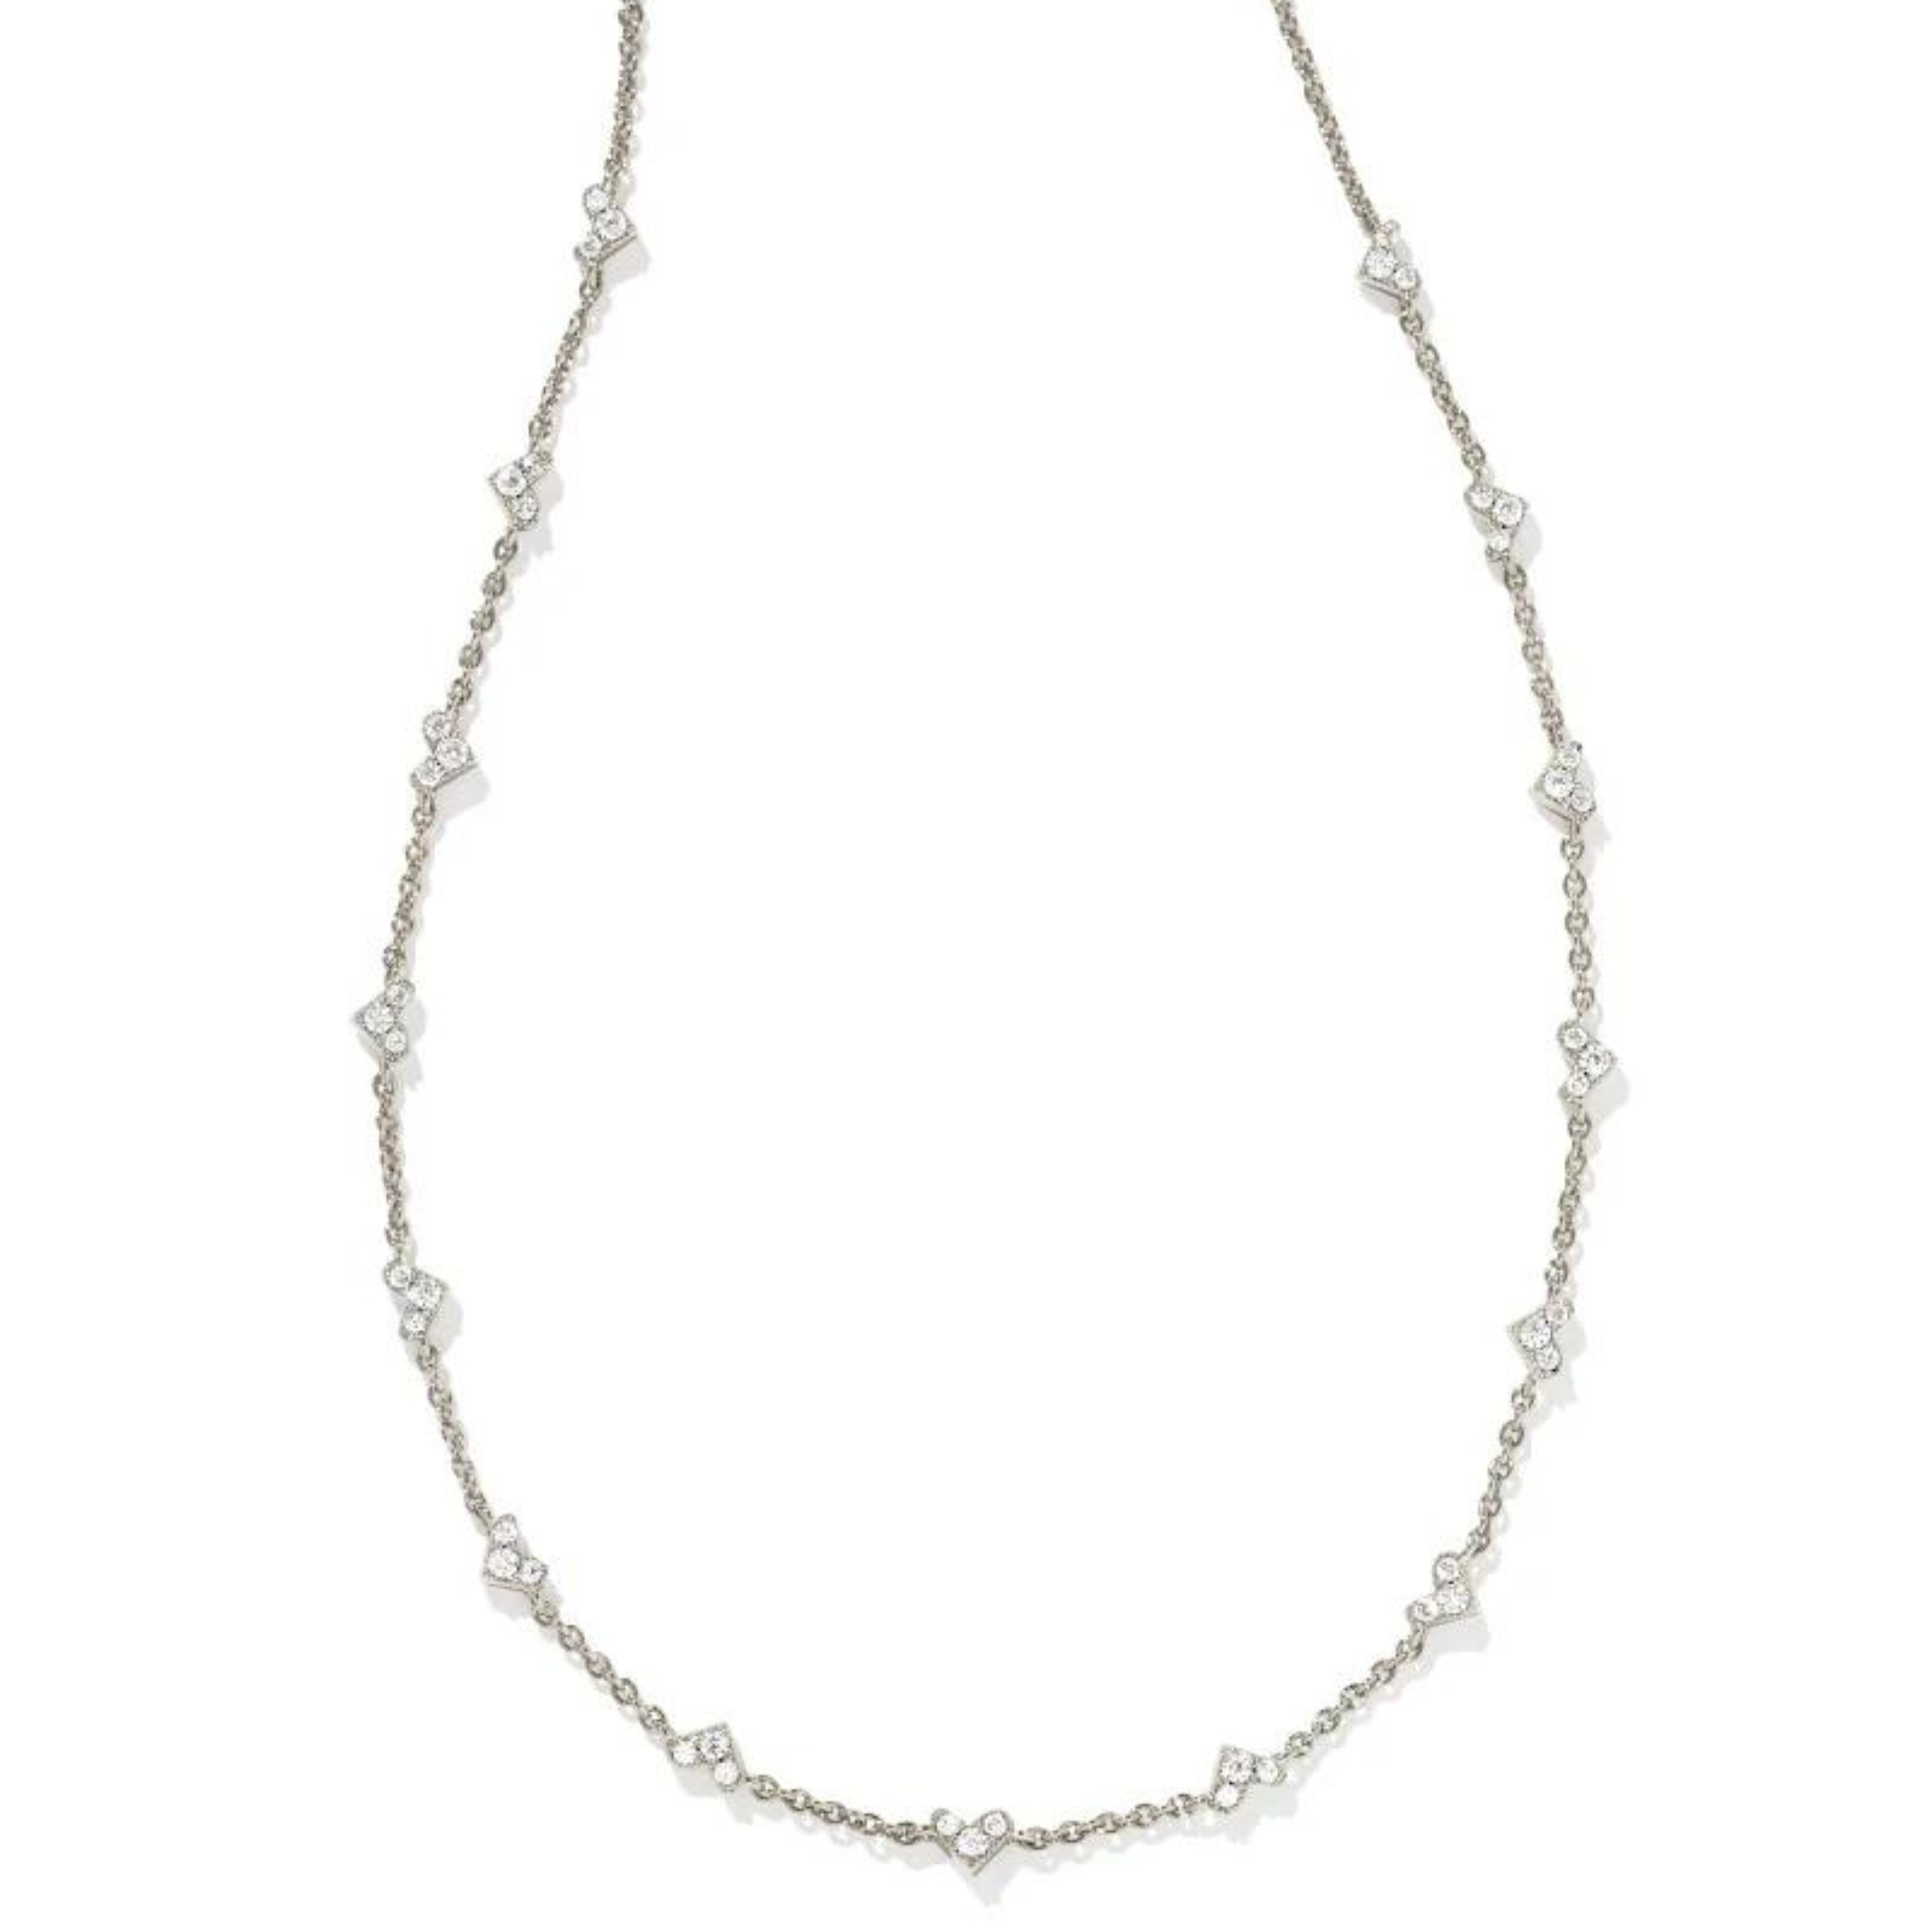 Thin, silver chain necklace with small, heart clear crystal pendants pictured on a white background. 